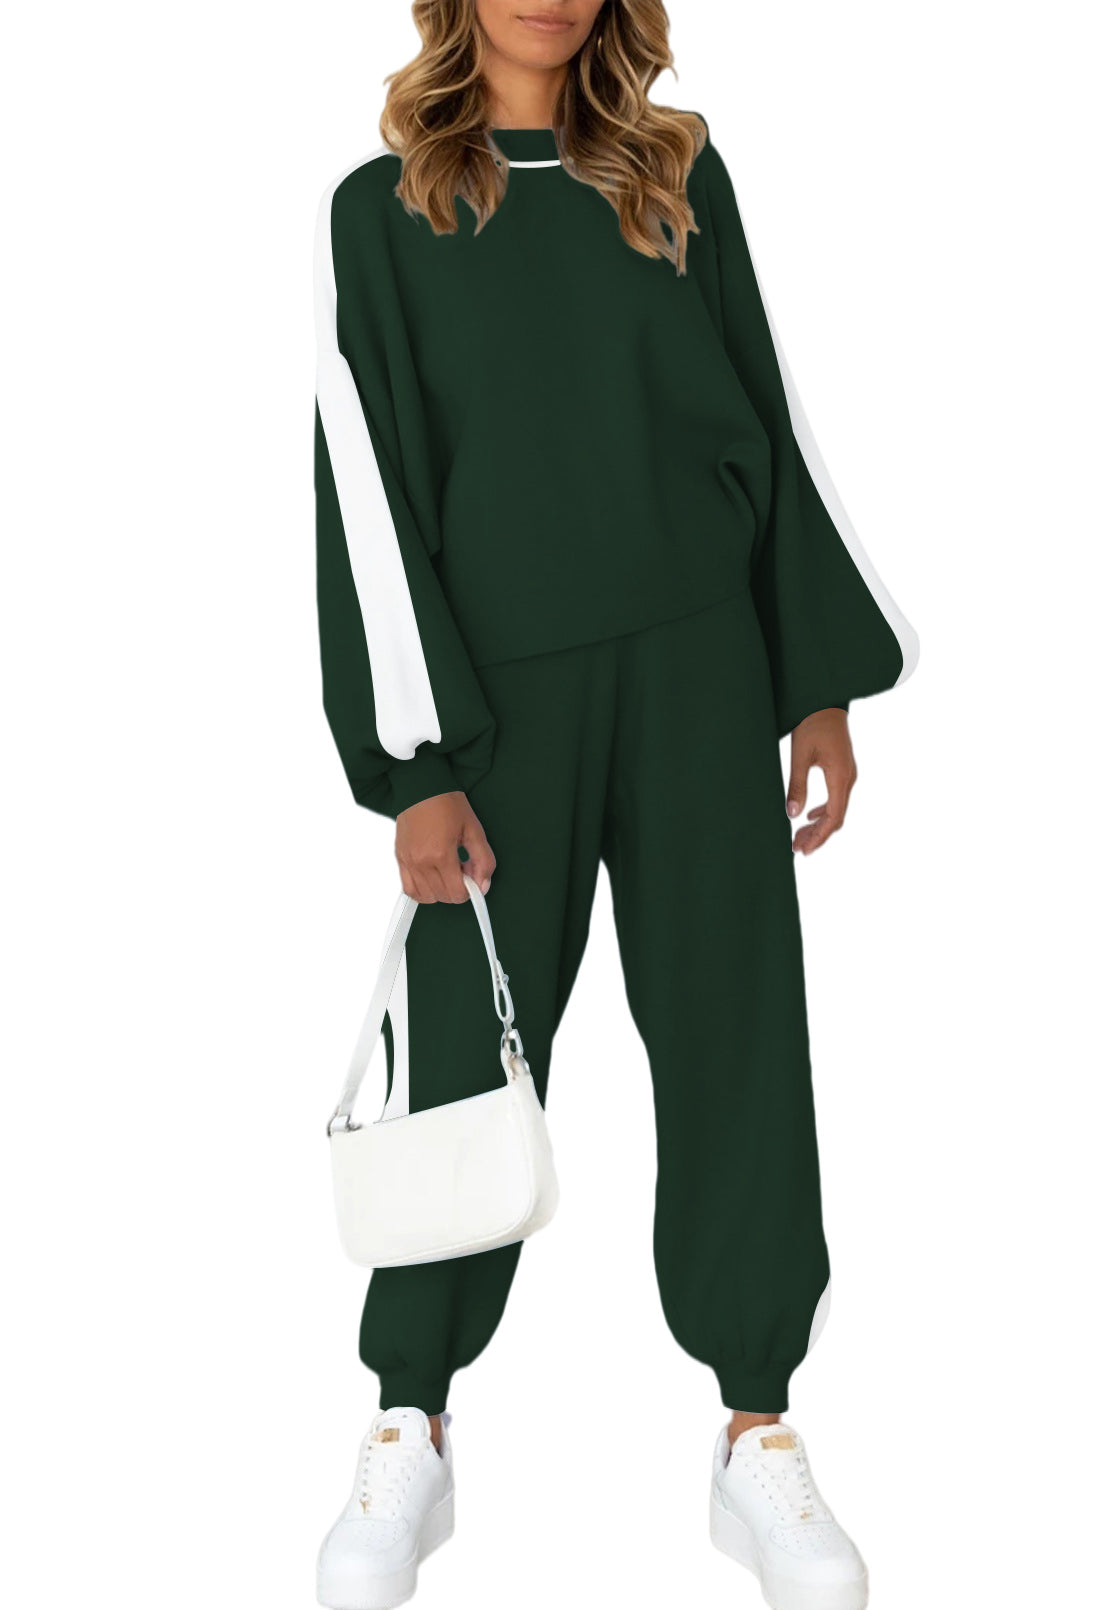 LC622153-109-L, LC622153-109-S, LC622153-109-M, LC622153-109-XL, Blue-green Women's Two Piece Outfits Striped Sweatshirt Jogger Pants Tracksuit